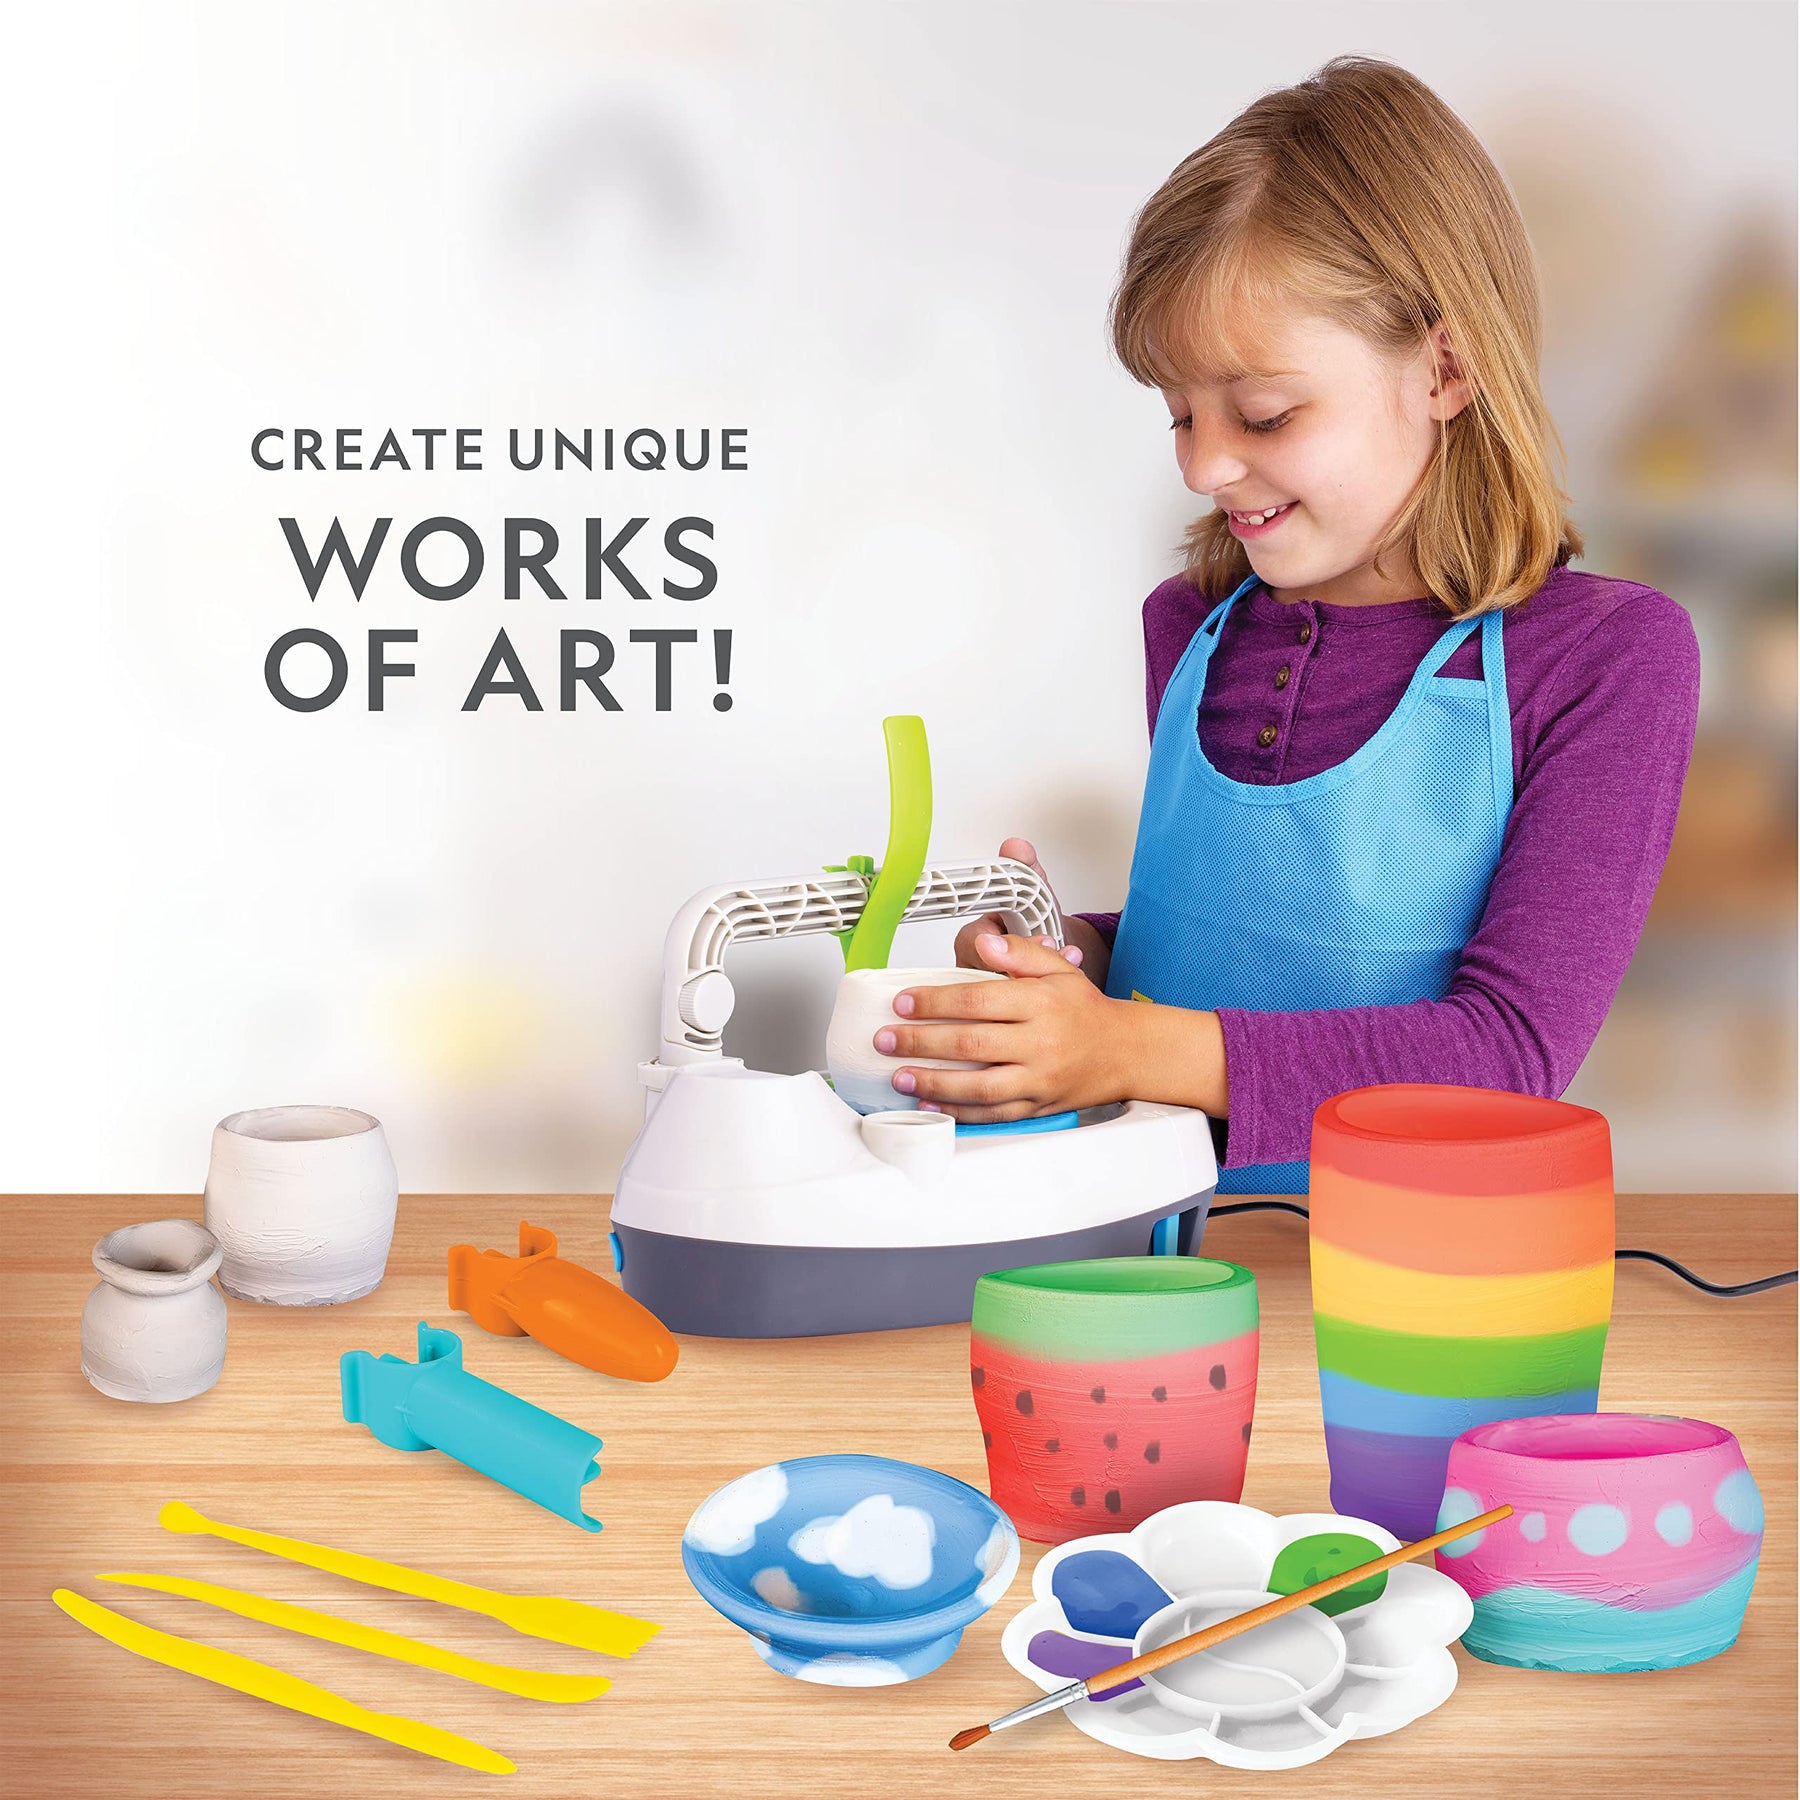 National Geographic Pottery Wheel for Kids – Complete Kit for Beginners, Plug-In Motor, 2 lbs. Air Dry Clay, Sculpting Clay Tools, Apron, Patented